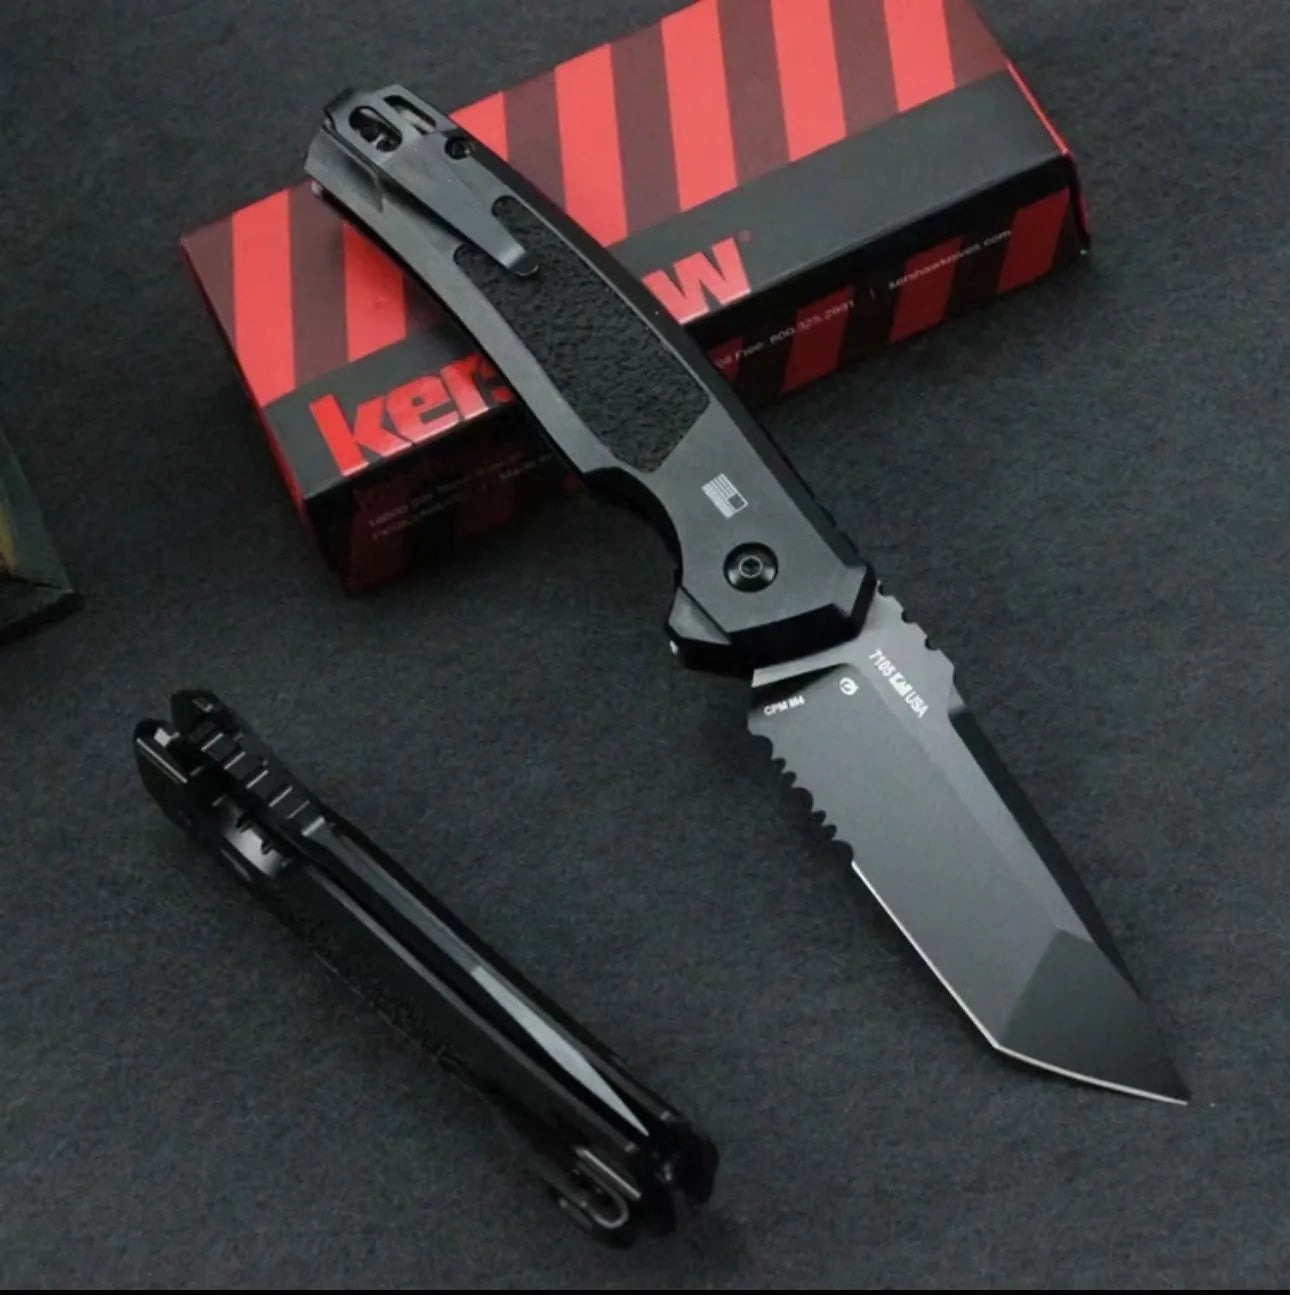 🔥Last Day Promotion- SAVE 70%🎄KERSHAW High Hardness Outdoor Folding Knife